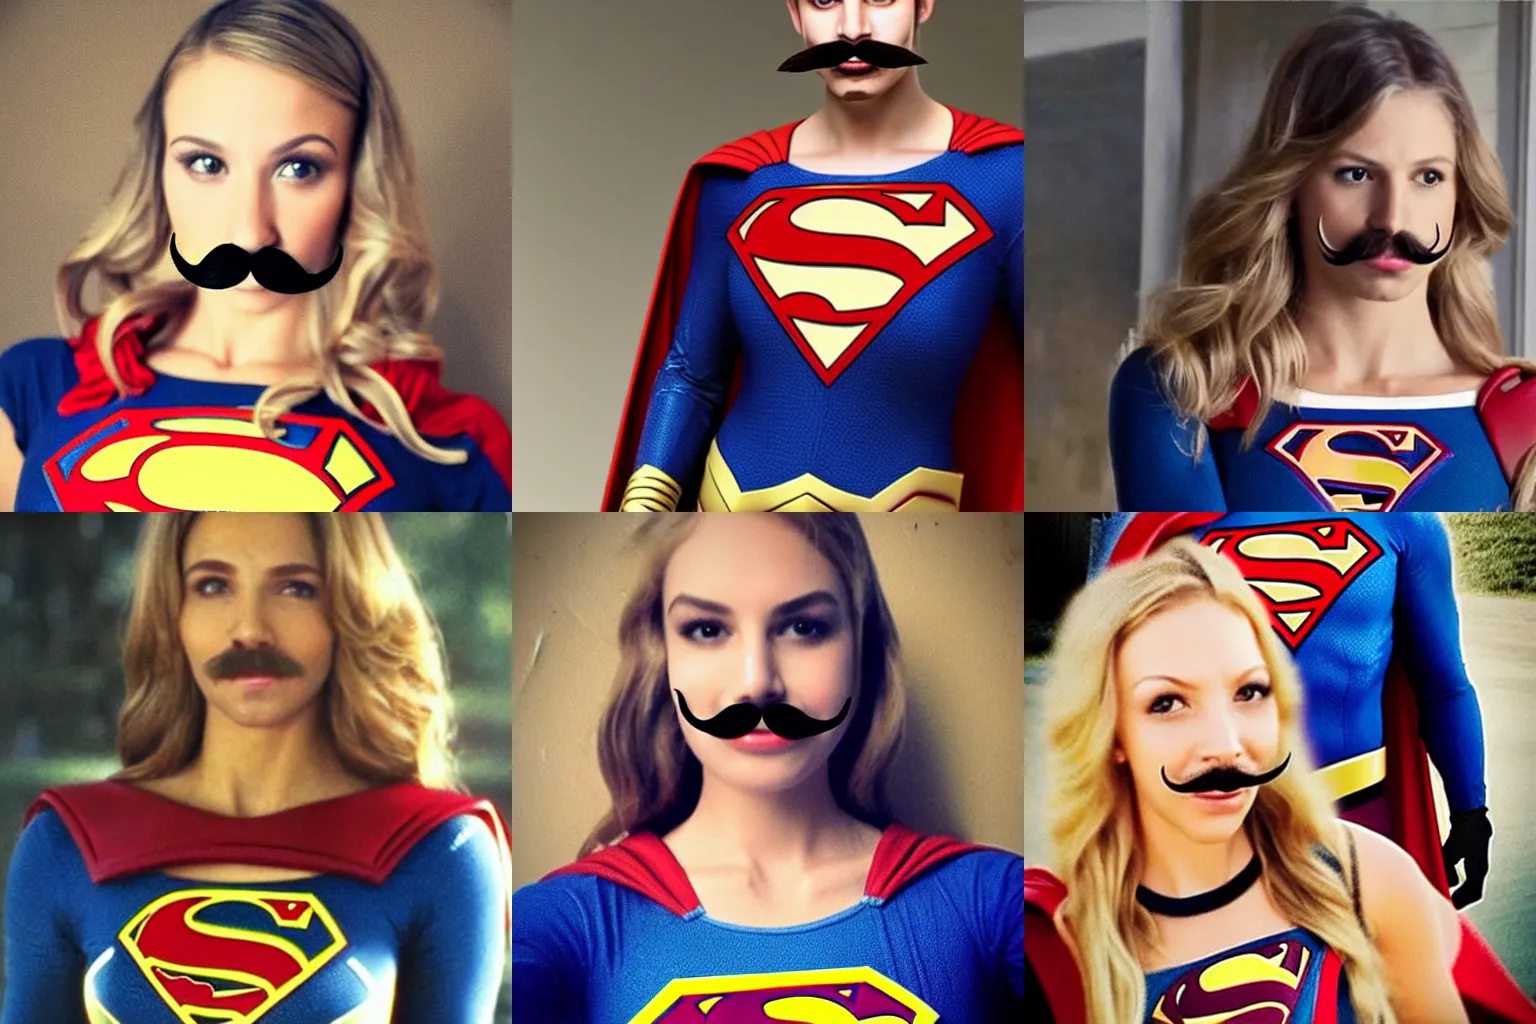 Prompt: mustache Supergirl with a prominent mustache mustache mustache mustache mustache mustache mustache mustache mustache mustache mustache